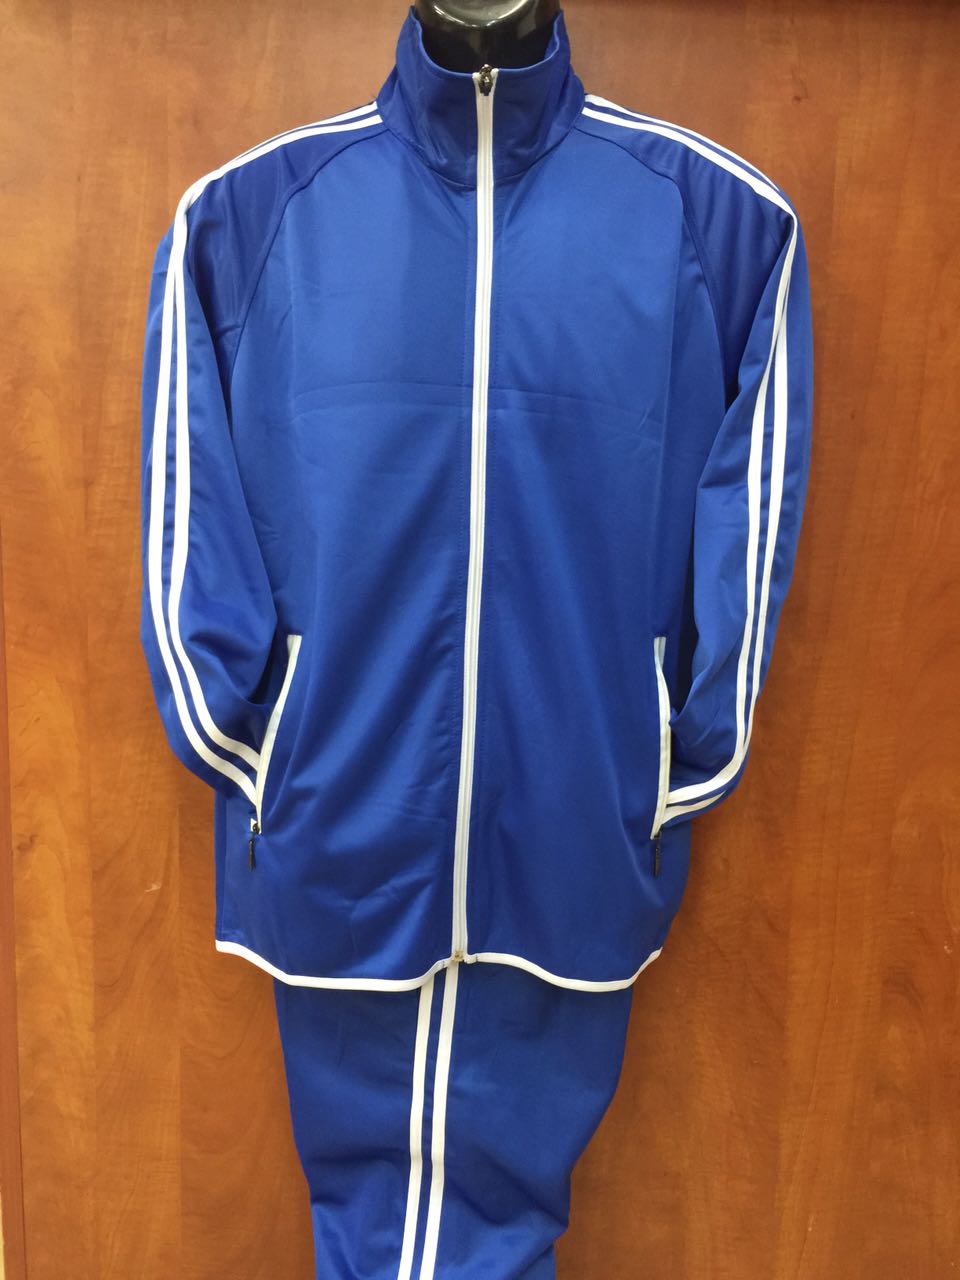 Tradesia Sports Equipment and Kits Wholesalers: Top Quality Tracksuits